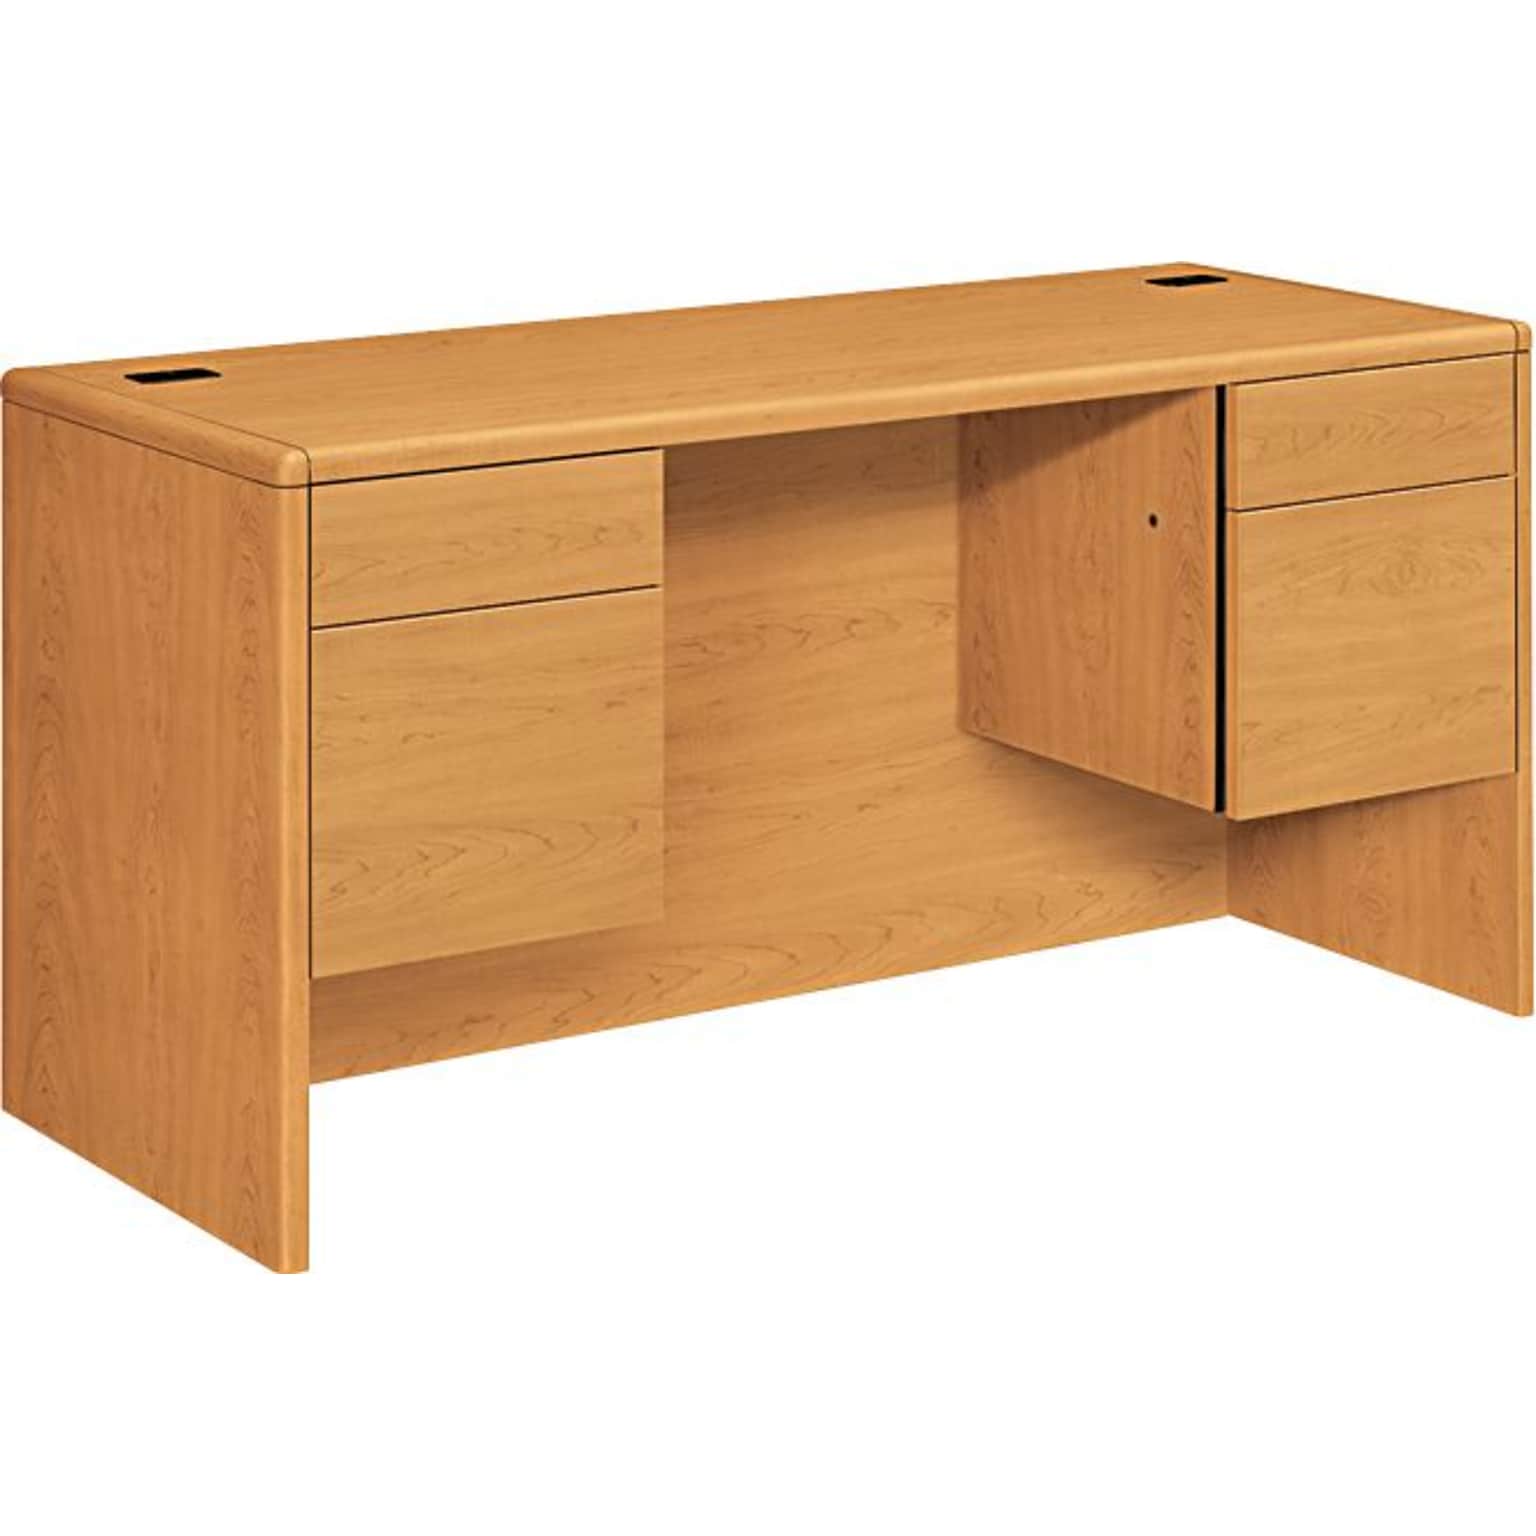 HON® 10700 Series Office Collection in Harvest, Kneespace Credenza, 60Wx24Dx29-1/2H